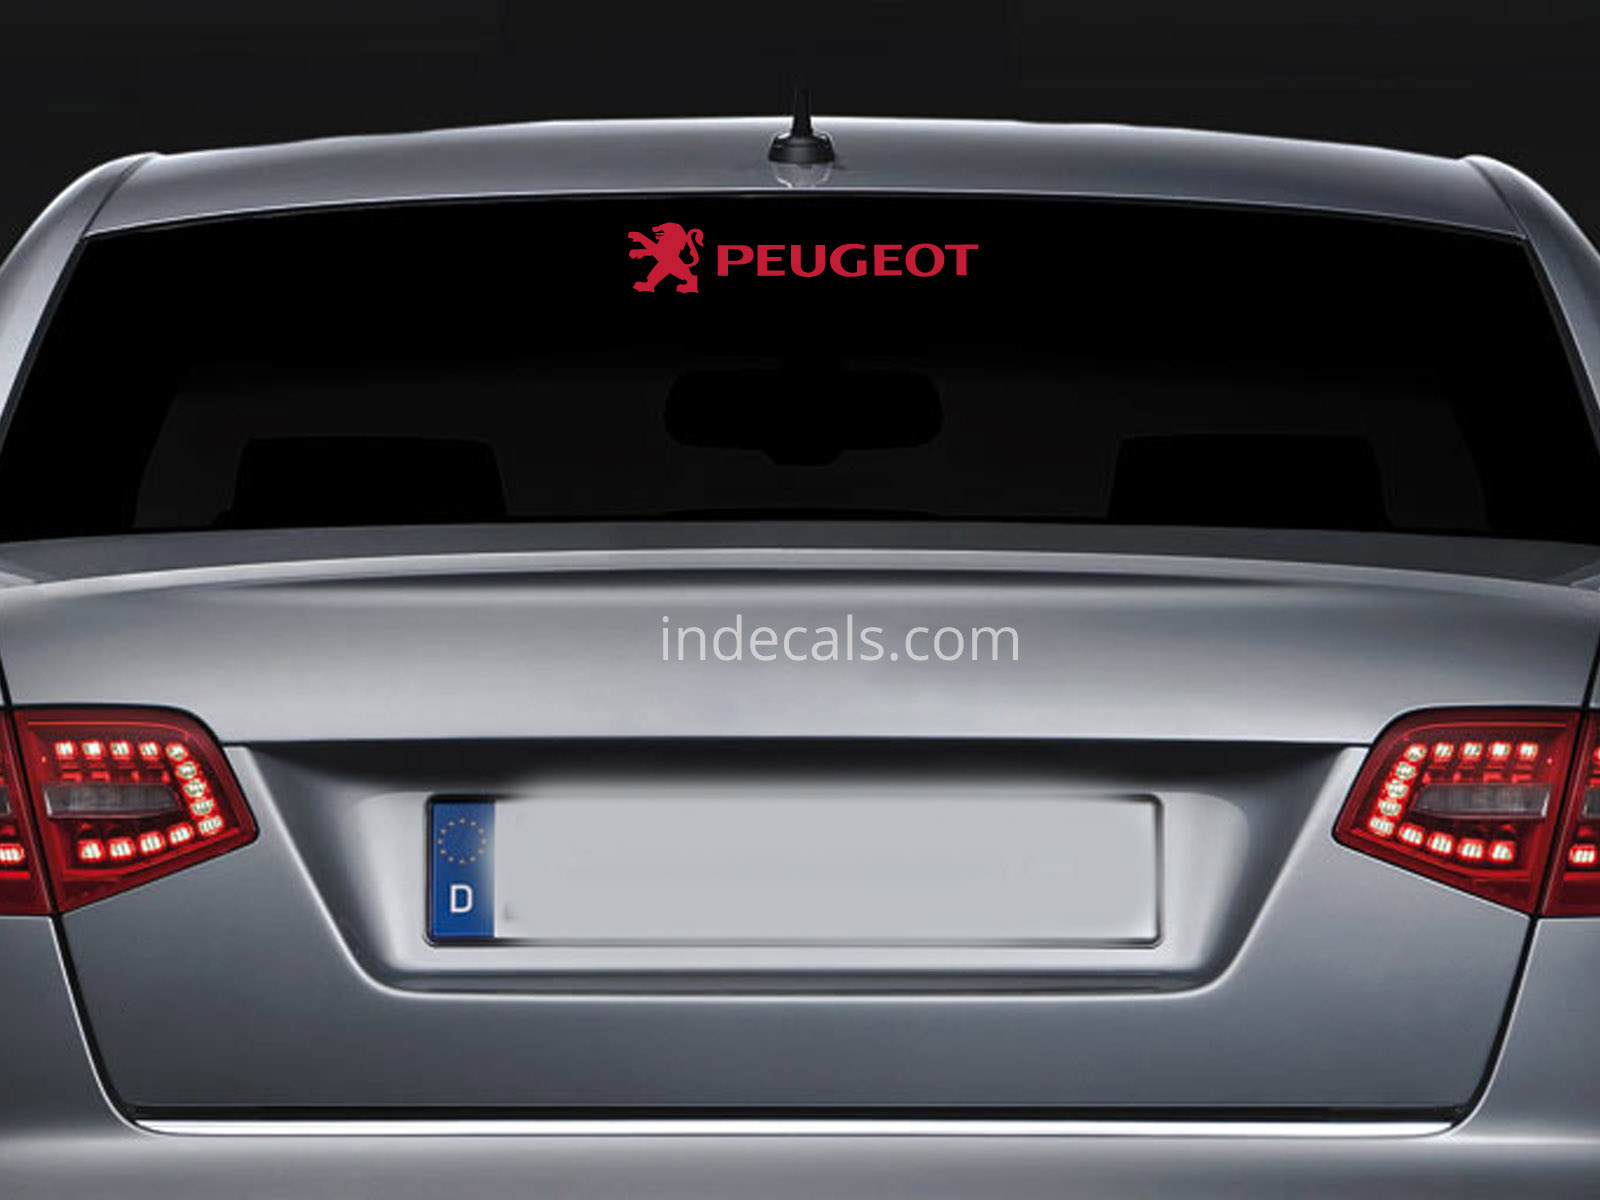 1 x Peugeot Sticker for Windshield or Back Window - Red